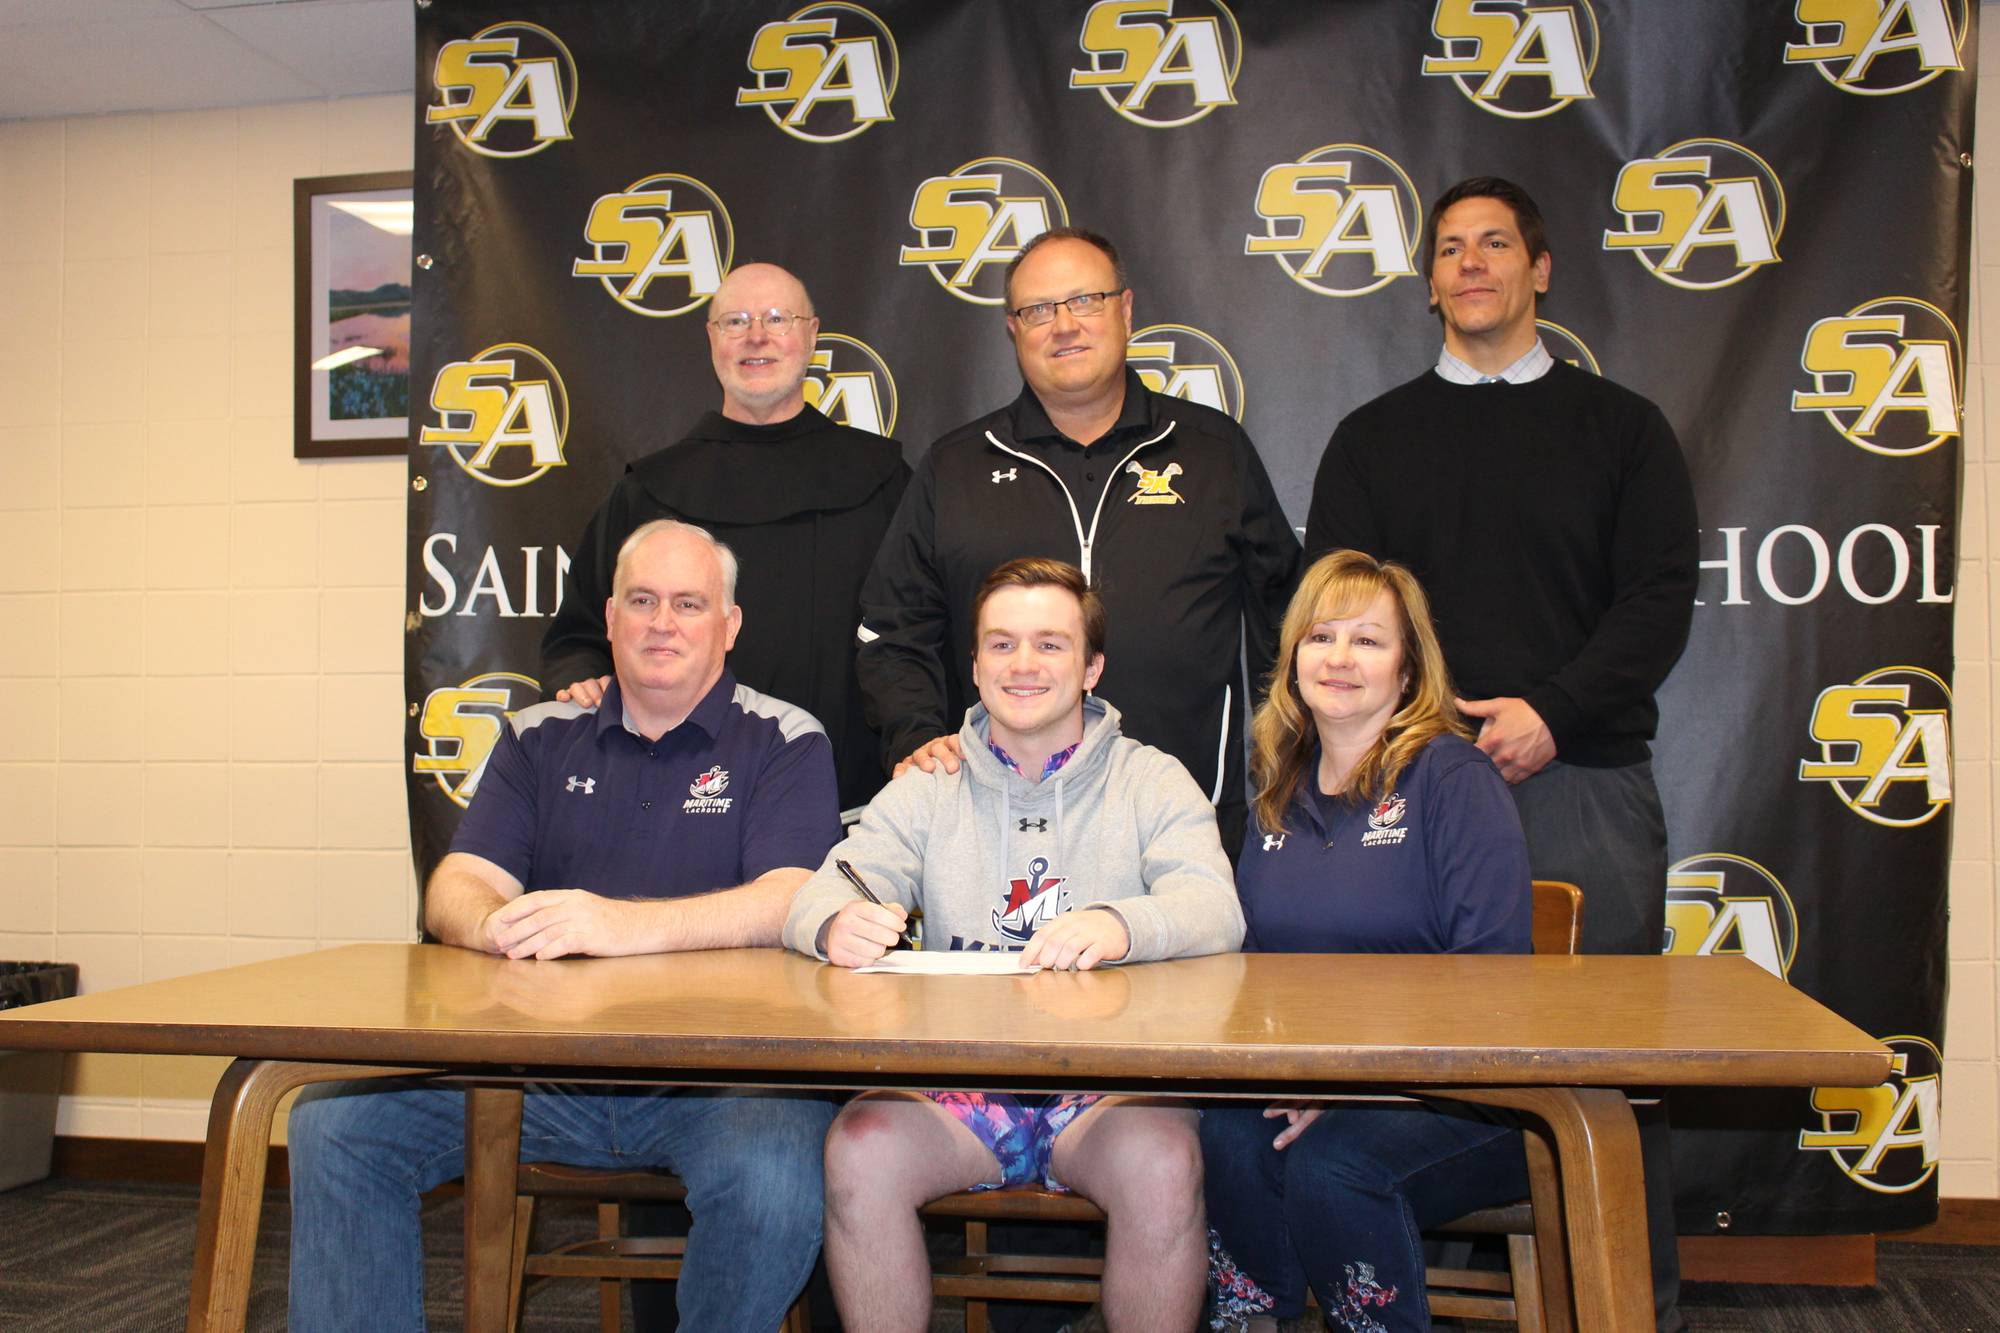 Congratulations to Konall Keane on committing to SUNY Maritime to play Lacrosse